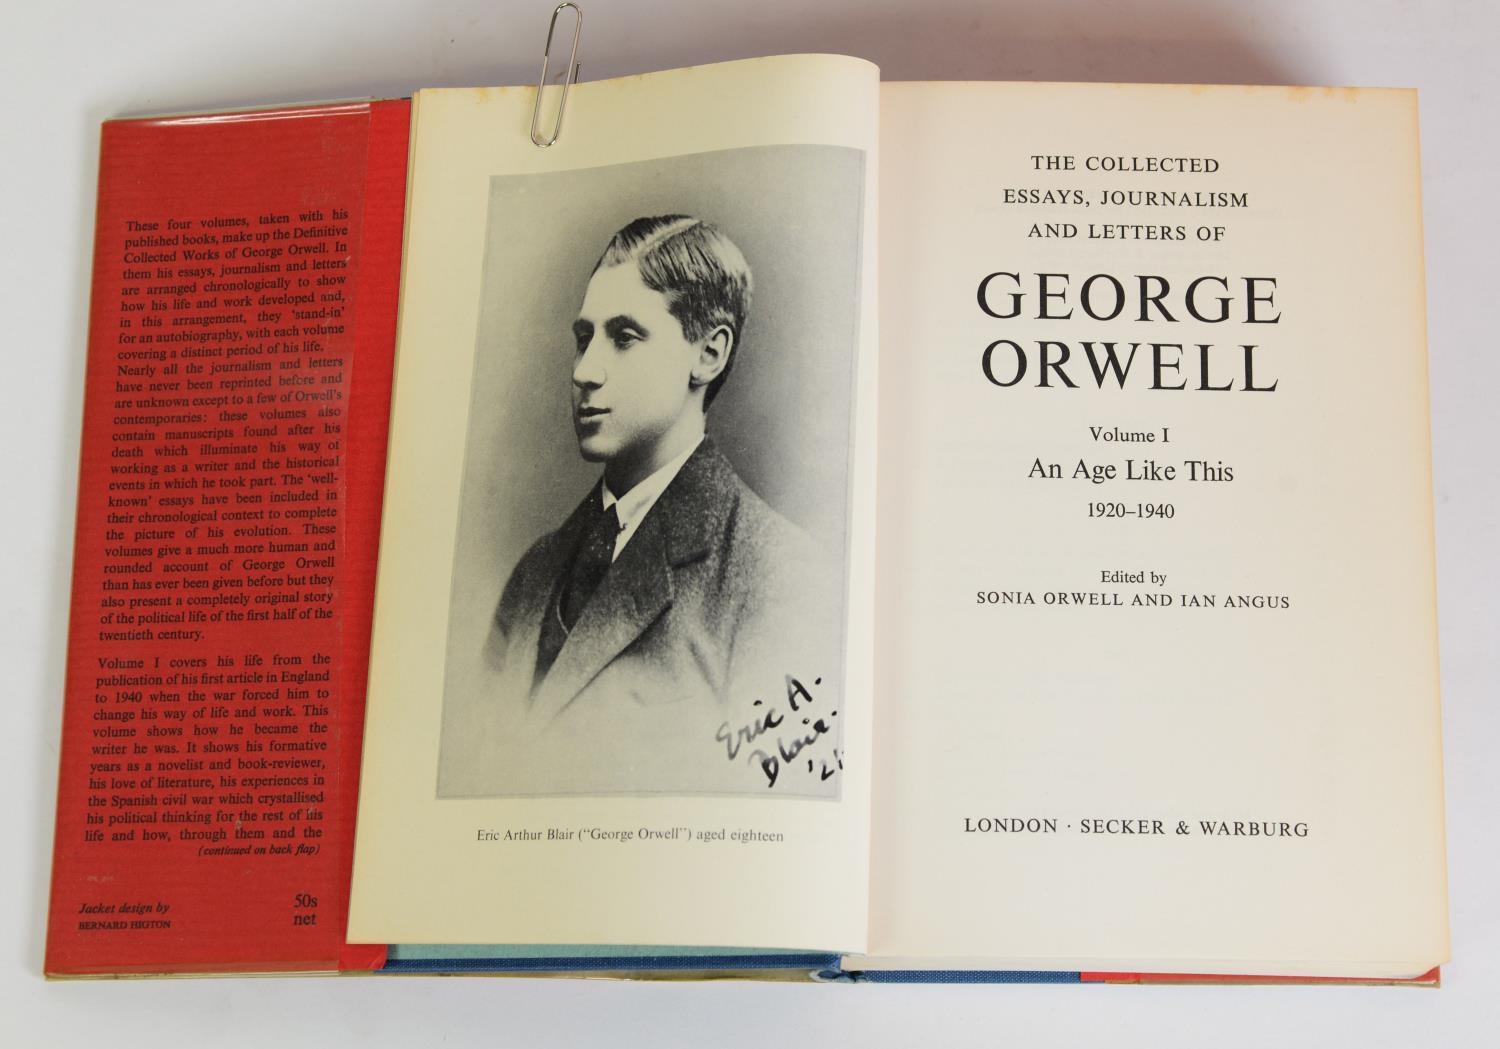 Sonia Orwell & Ian Angus - The Collected Essays, Journalism and Letters of George Orwell, 4 Vol, pub - Image 2 of 5